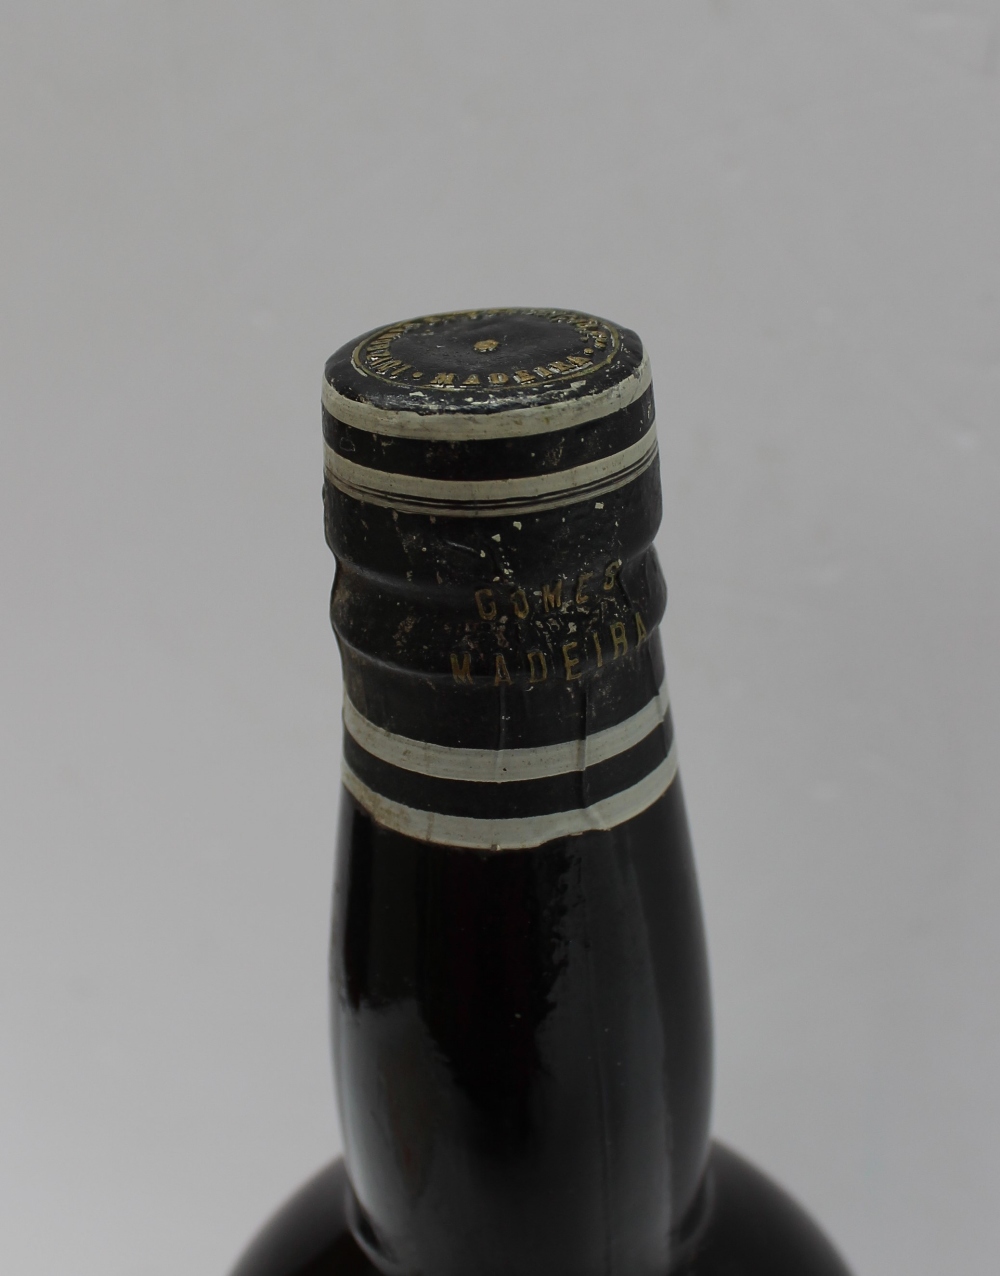 Gomes Madeira Sercial Solera 1839 - Gifted by Alfred Alves (a steel works owner in Lisbon) in 1974 - Image 2 of 4